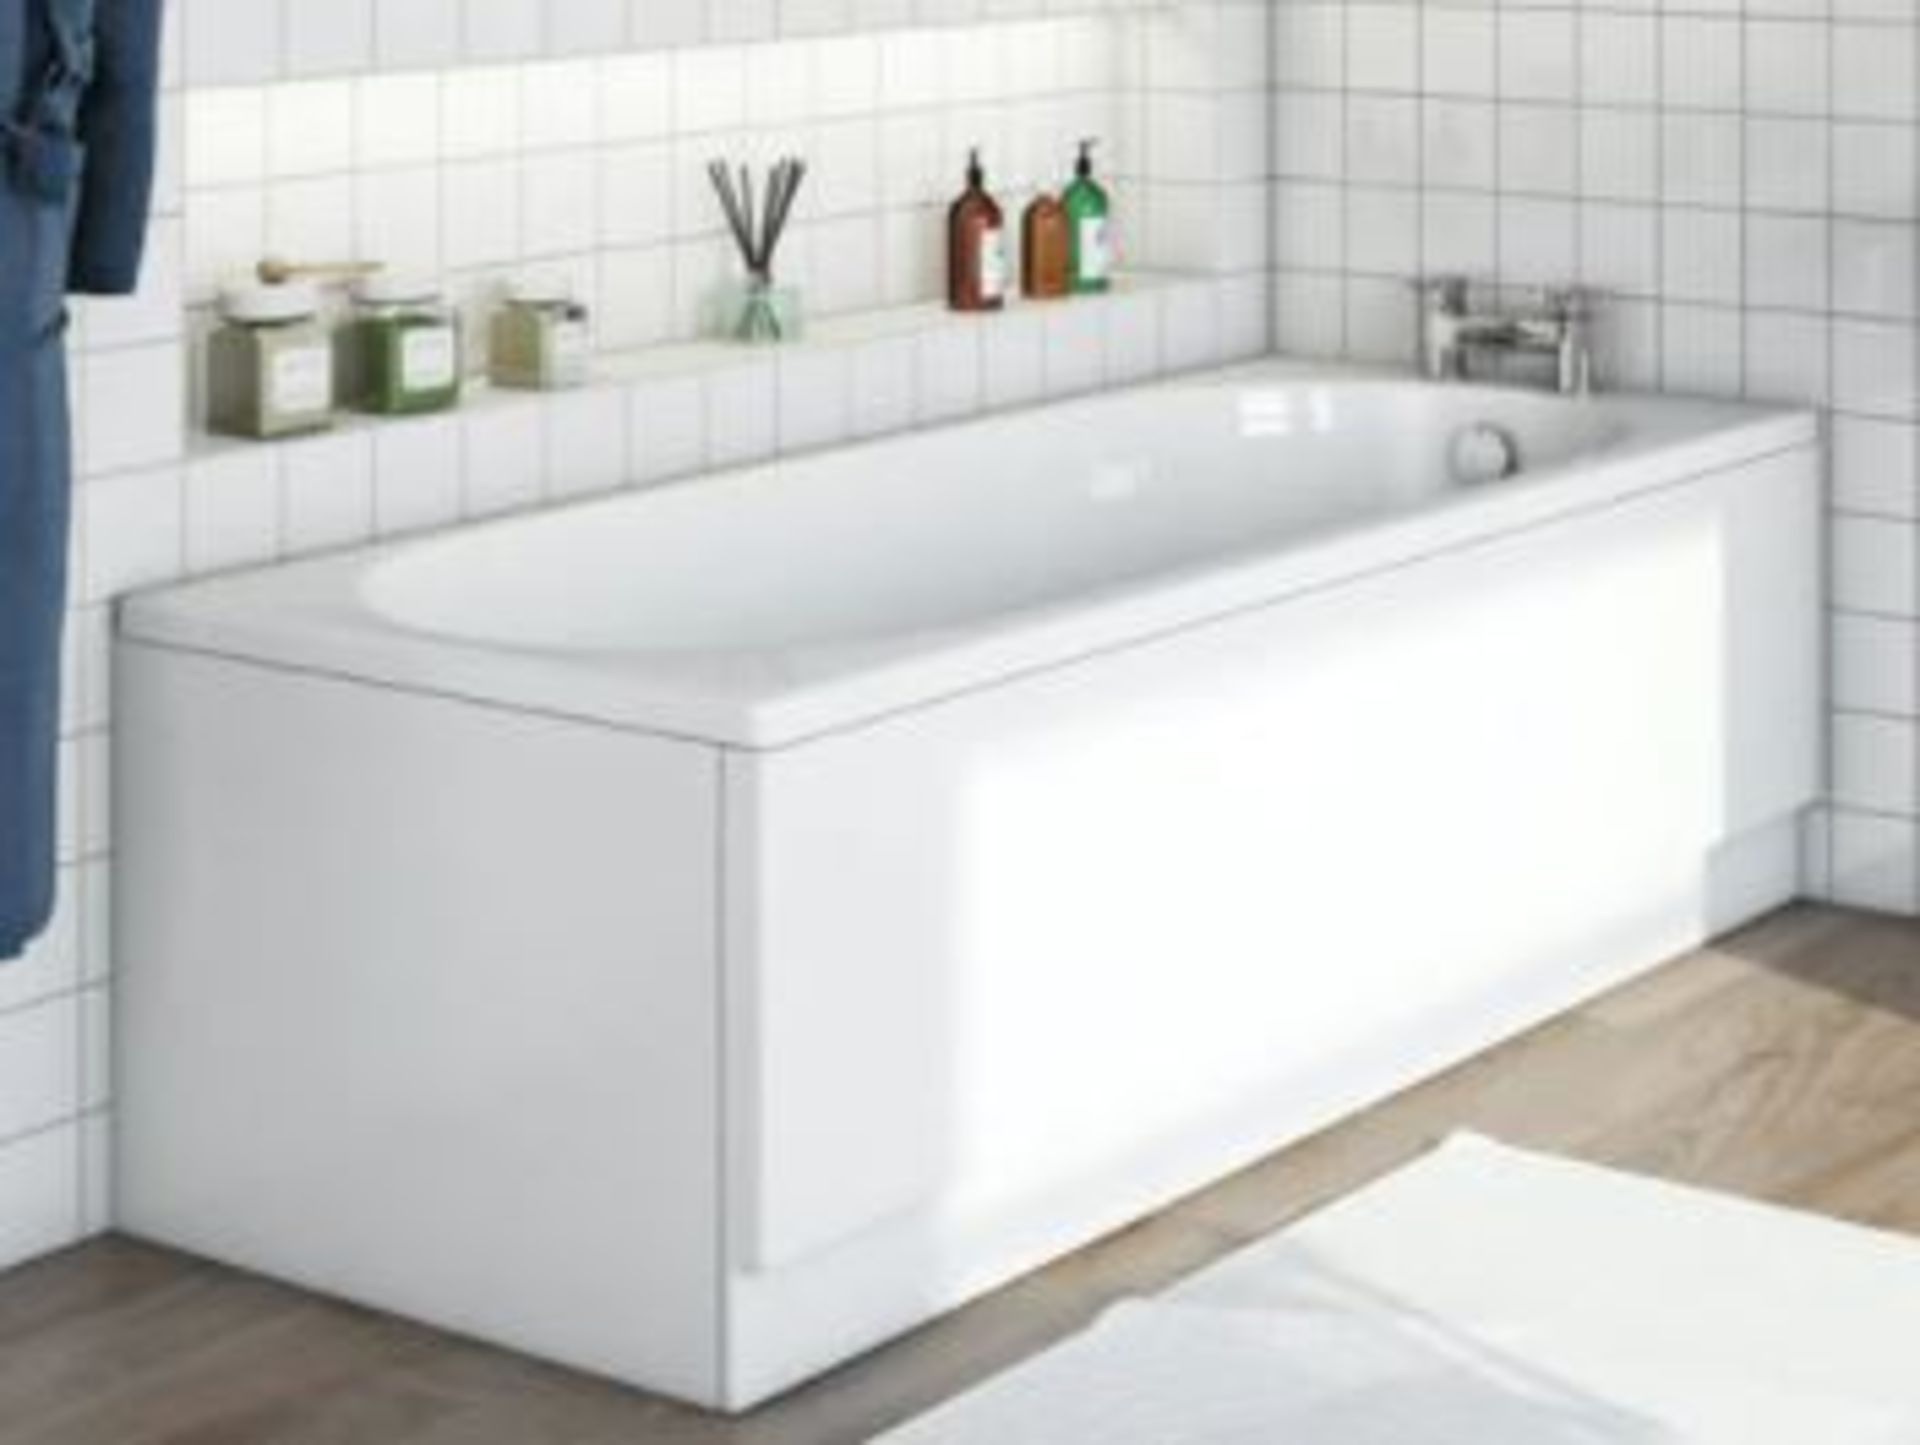 1 X Single Ended Square Edge Bath 1700 X 700 (ncric1770s) RRP £165 - Image 2 of 3